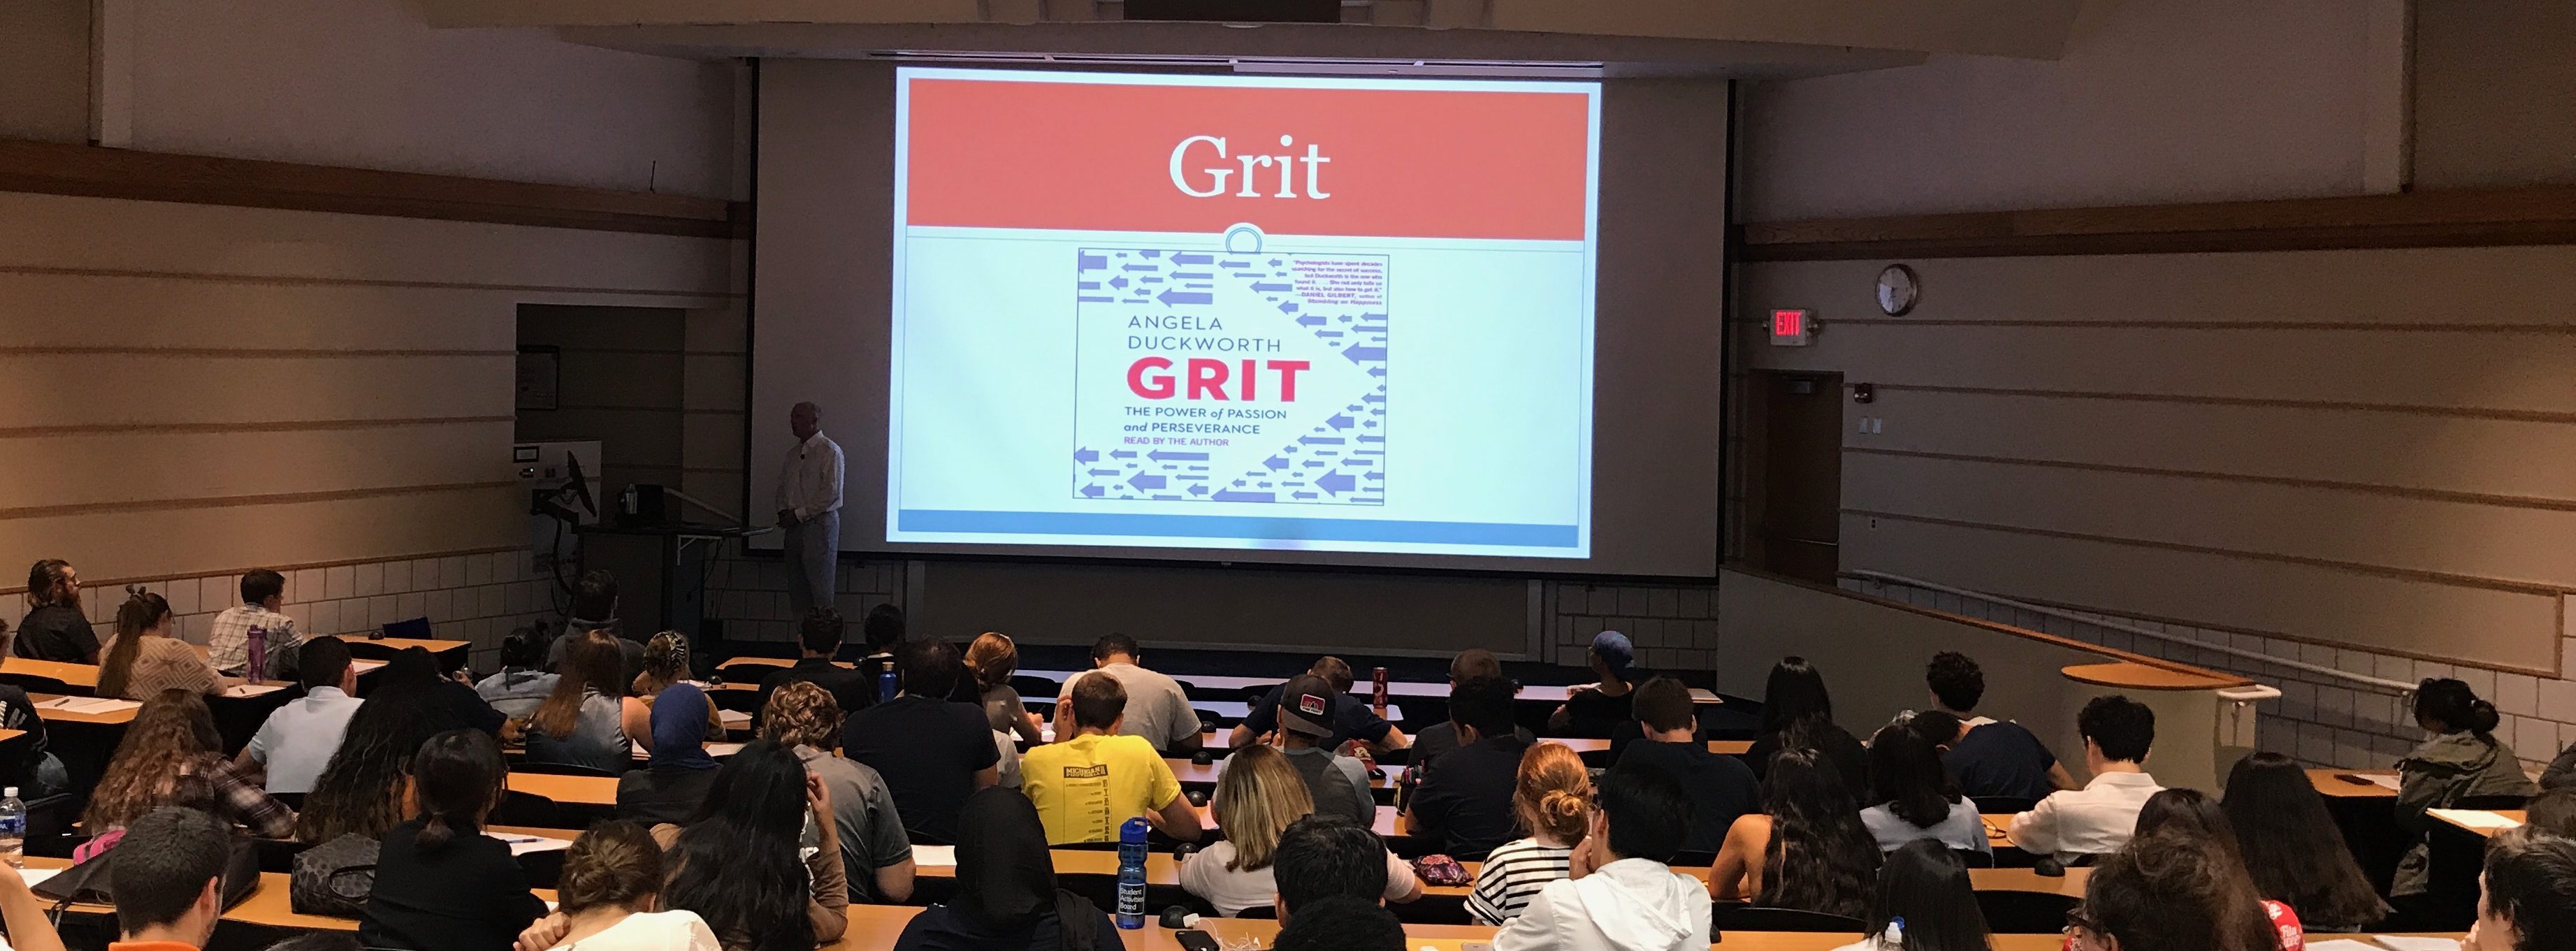 GRIT - Students sitting in multiple tiered rows in a classroom attending a workshop